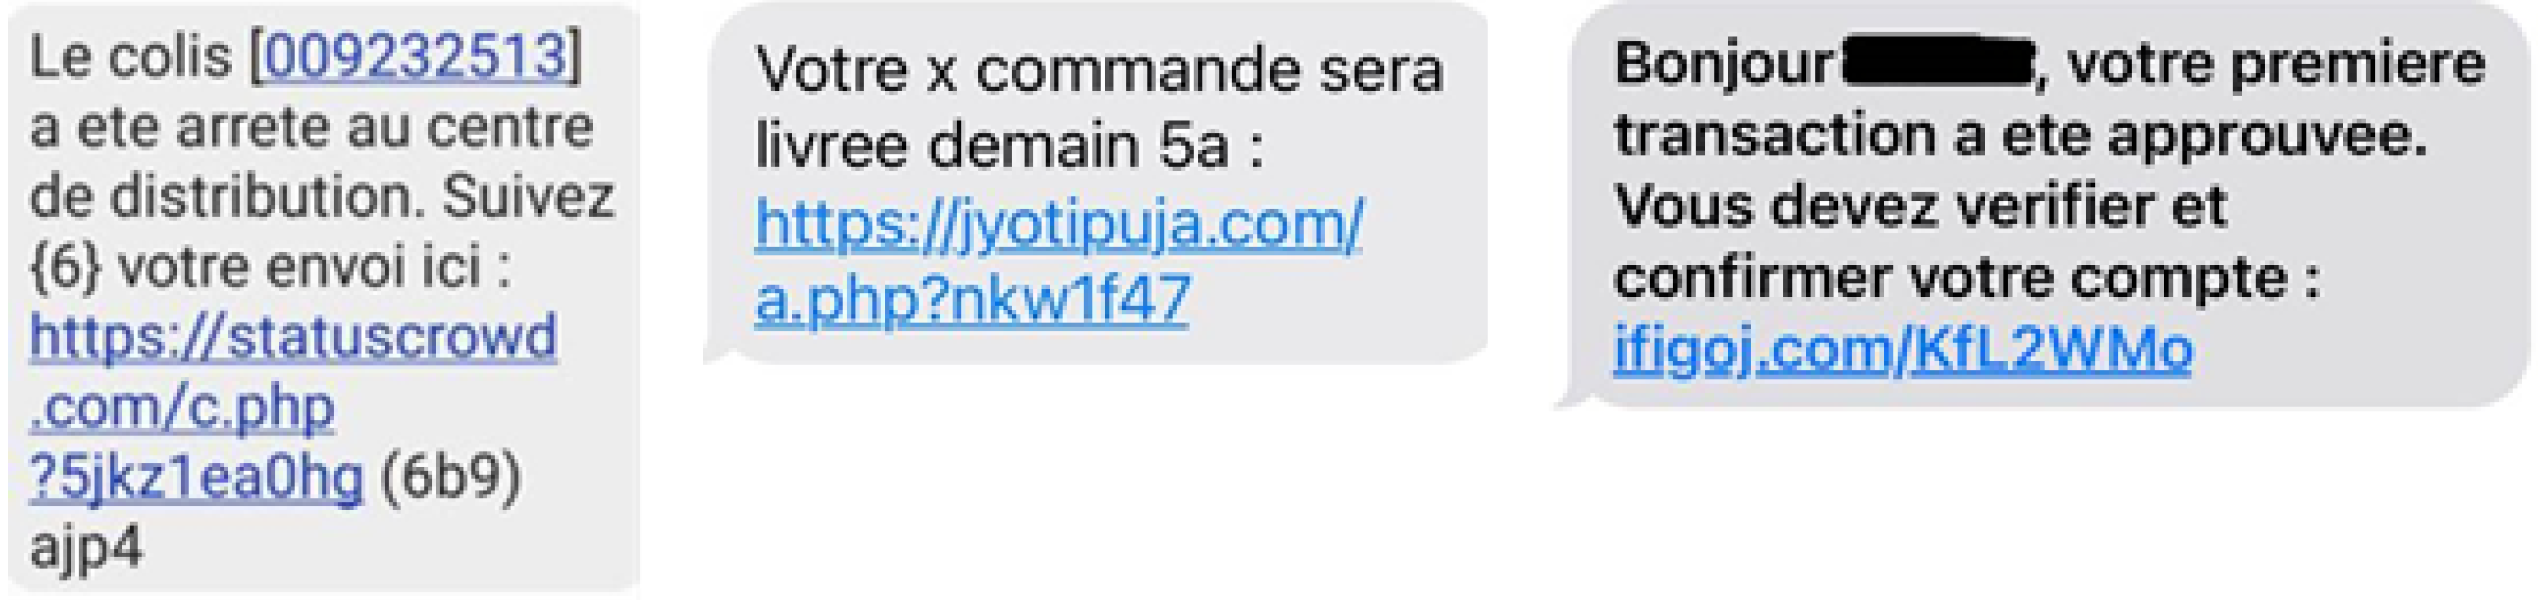 Exemples messages frauduleux